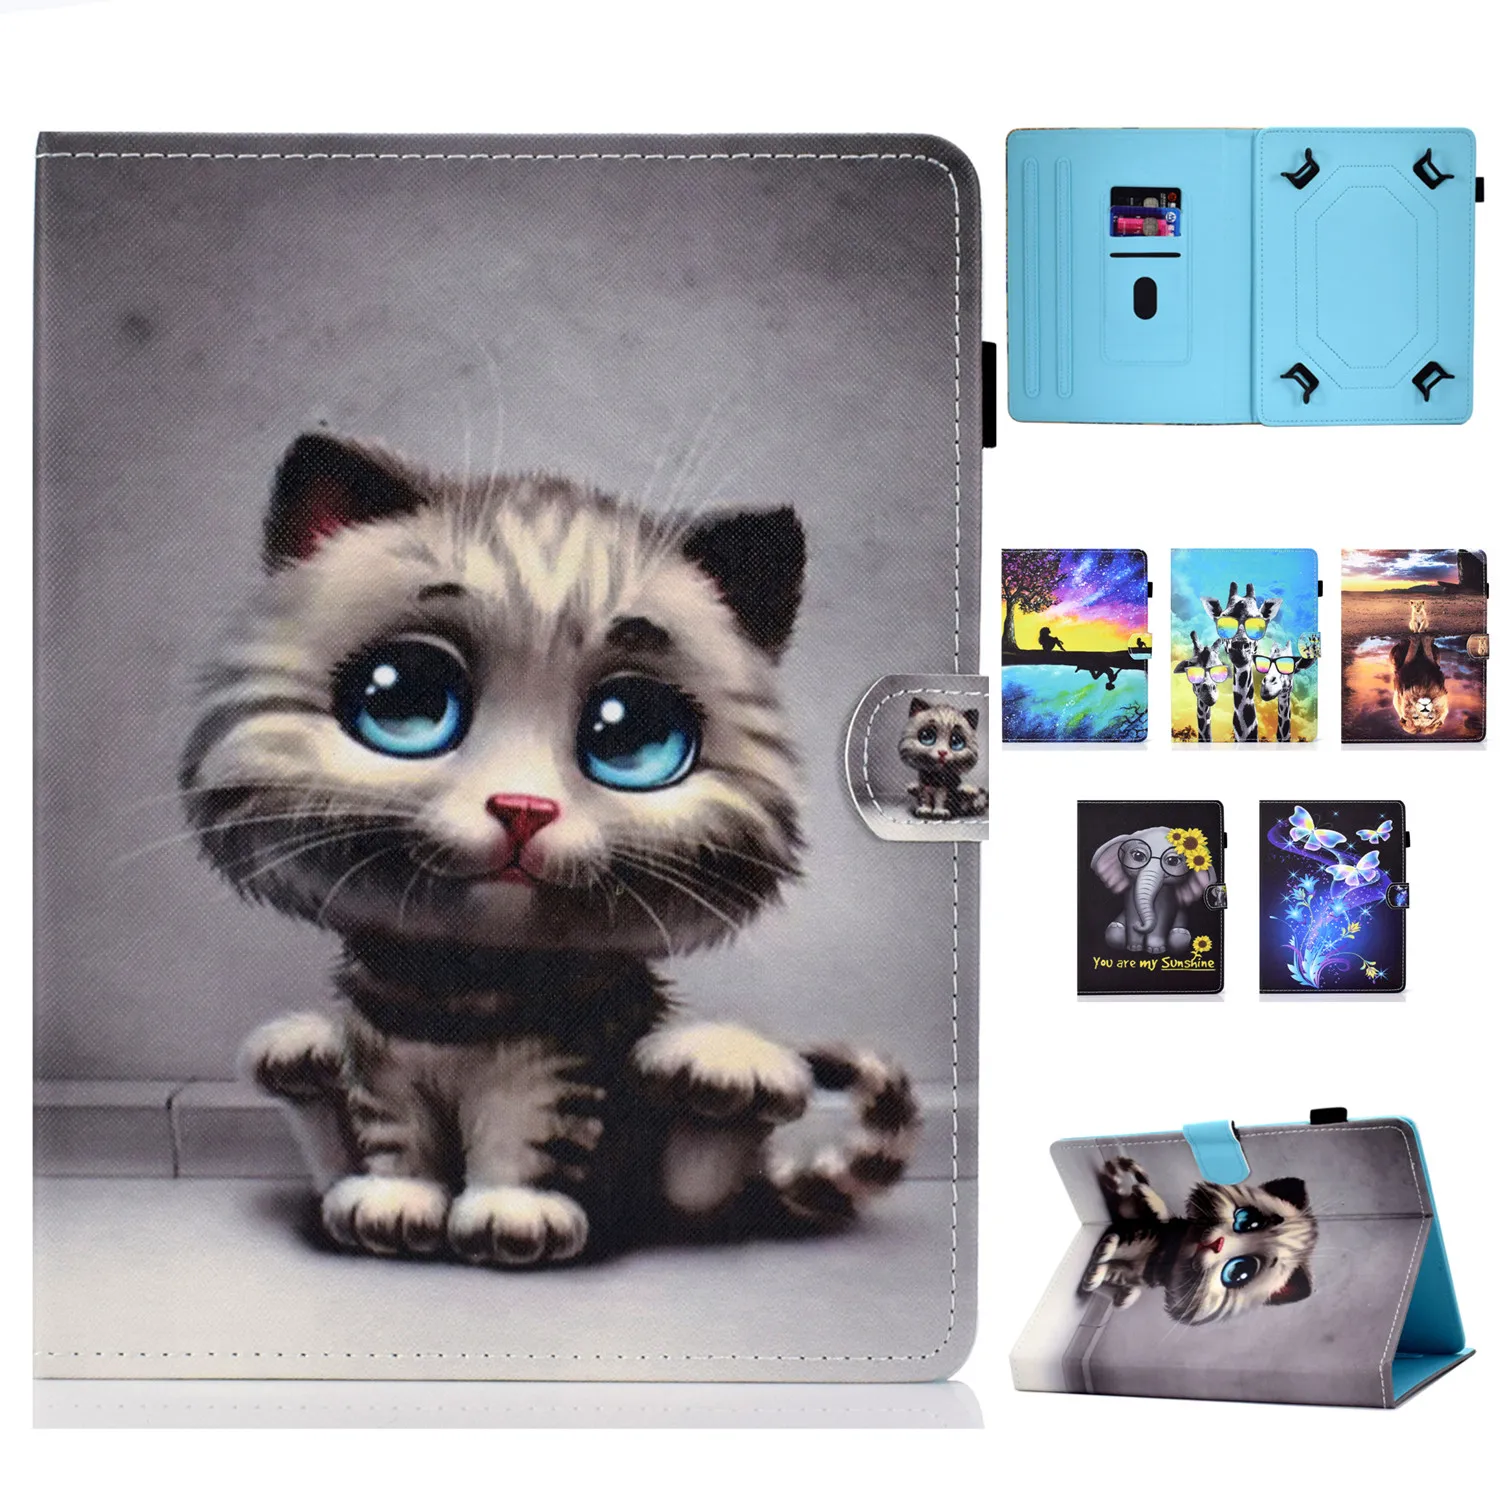 PU Leather Universal Case for Kobo Glo HD Touch EReader / Aura Edition 2 / Clara HD N249 6" Ebook Print Cover Cute Tablet Bag